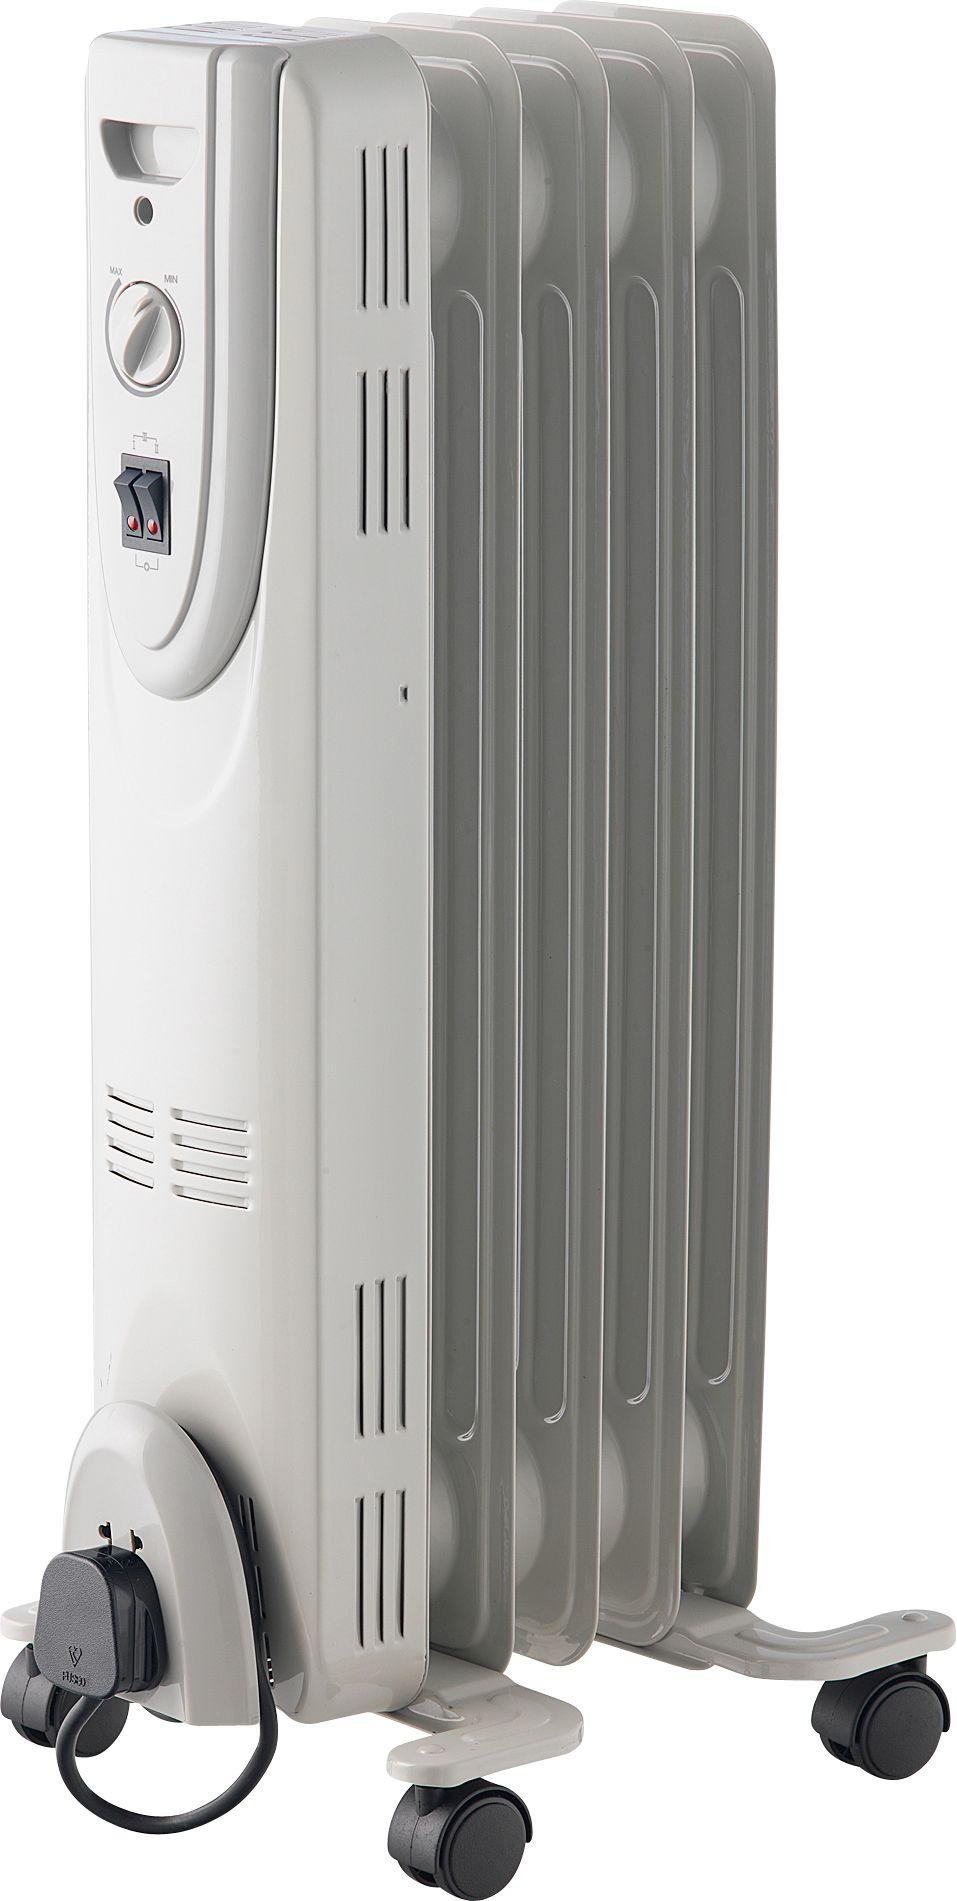 Simple Value by Argos - 1kW Oil Filled Radiator